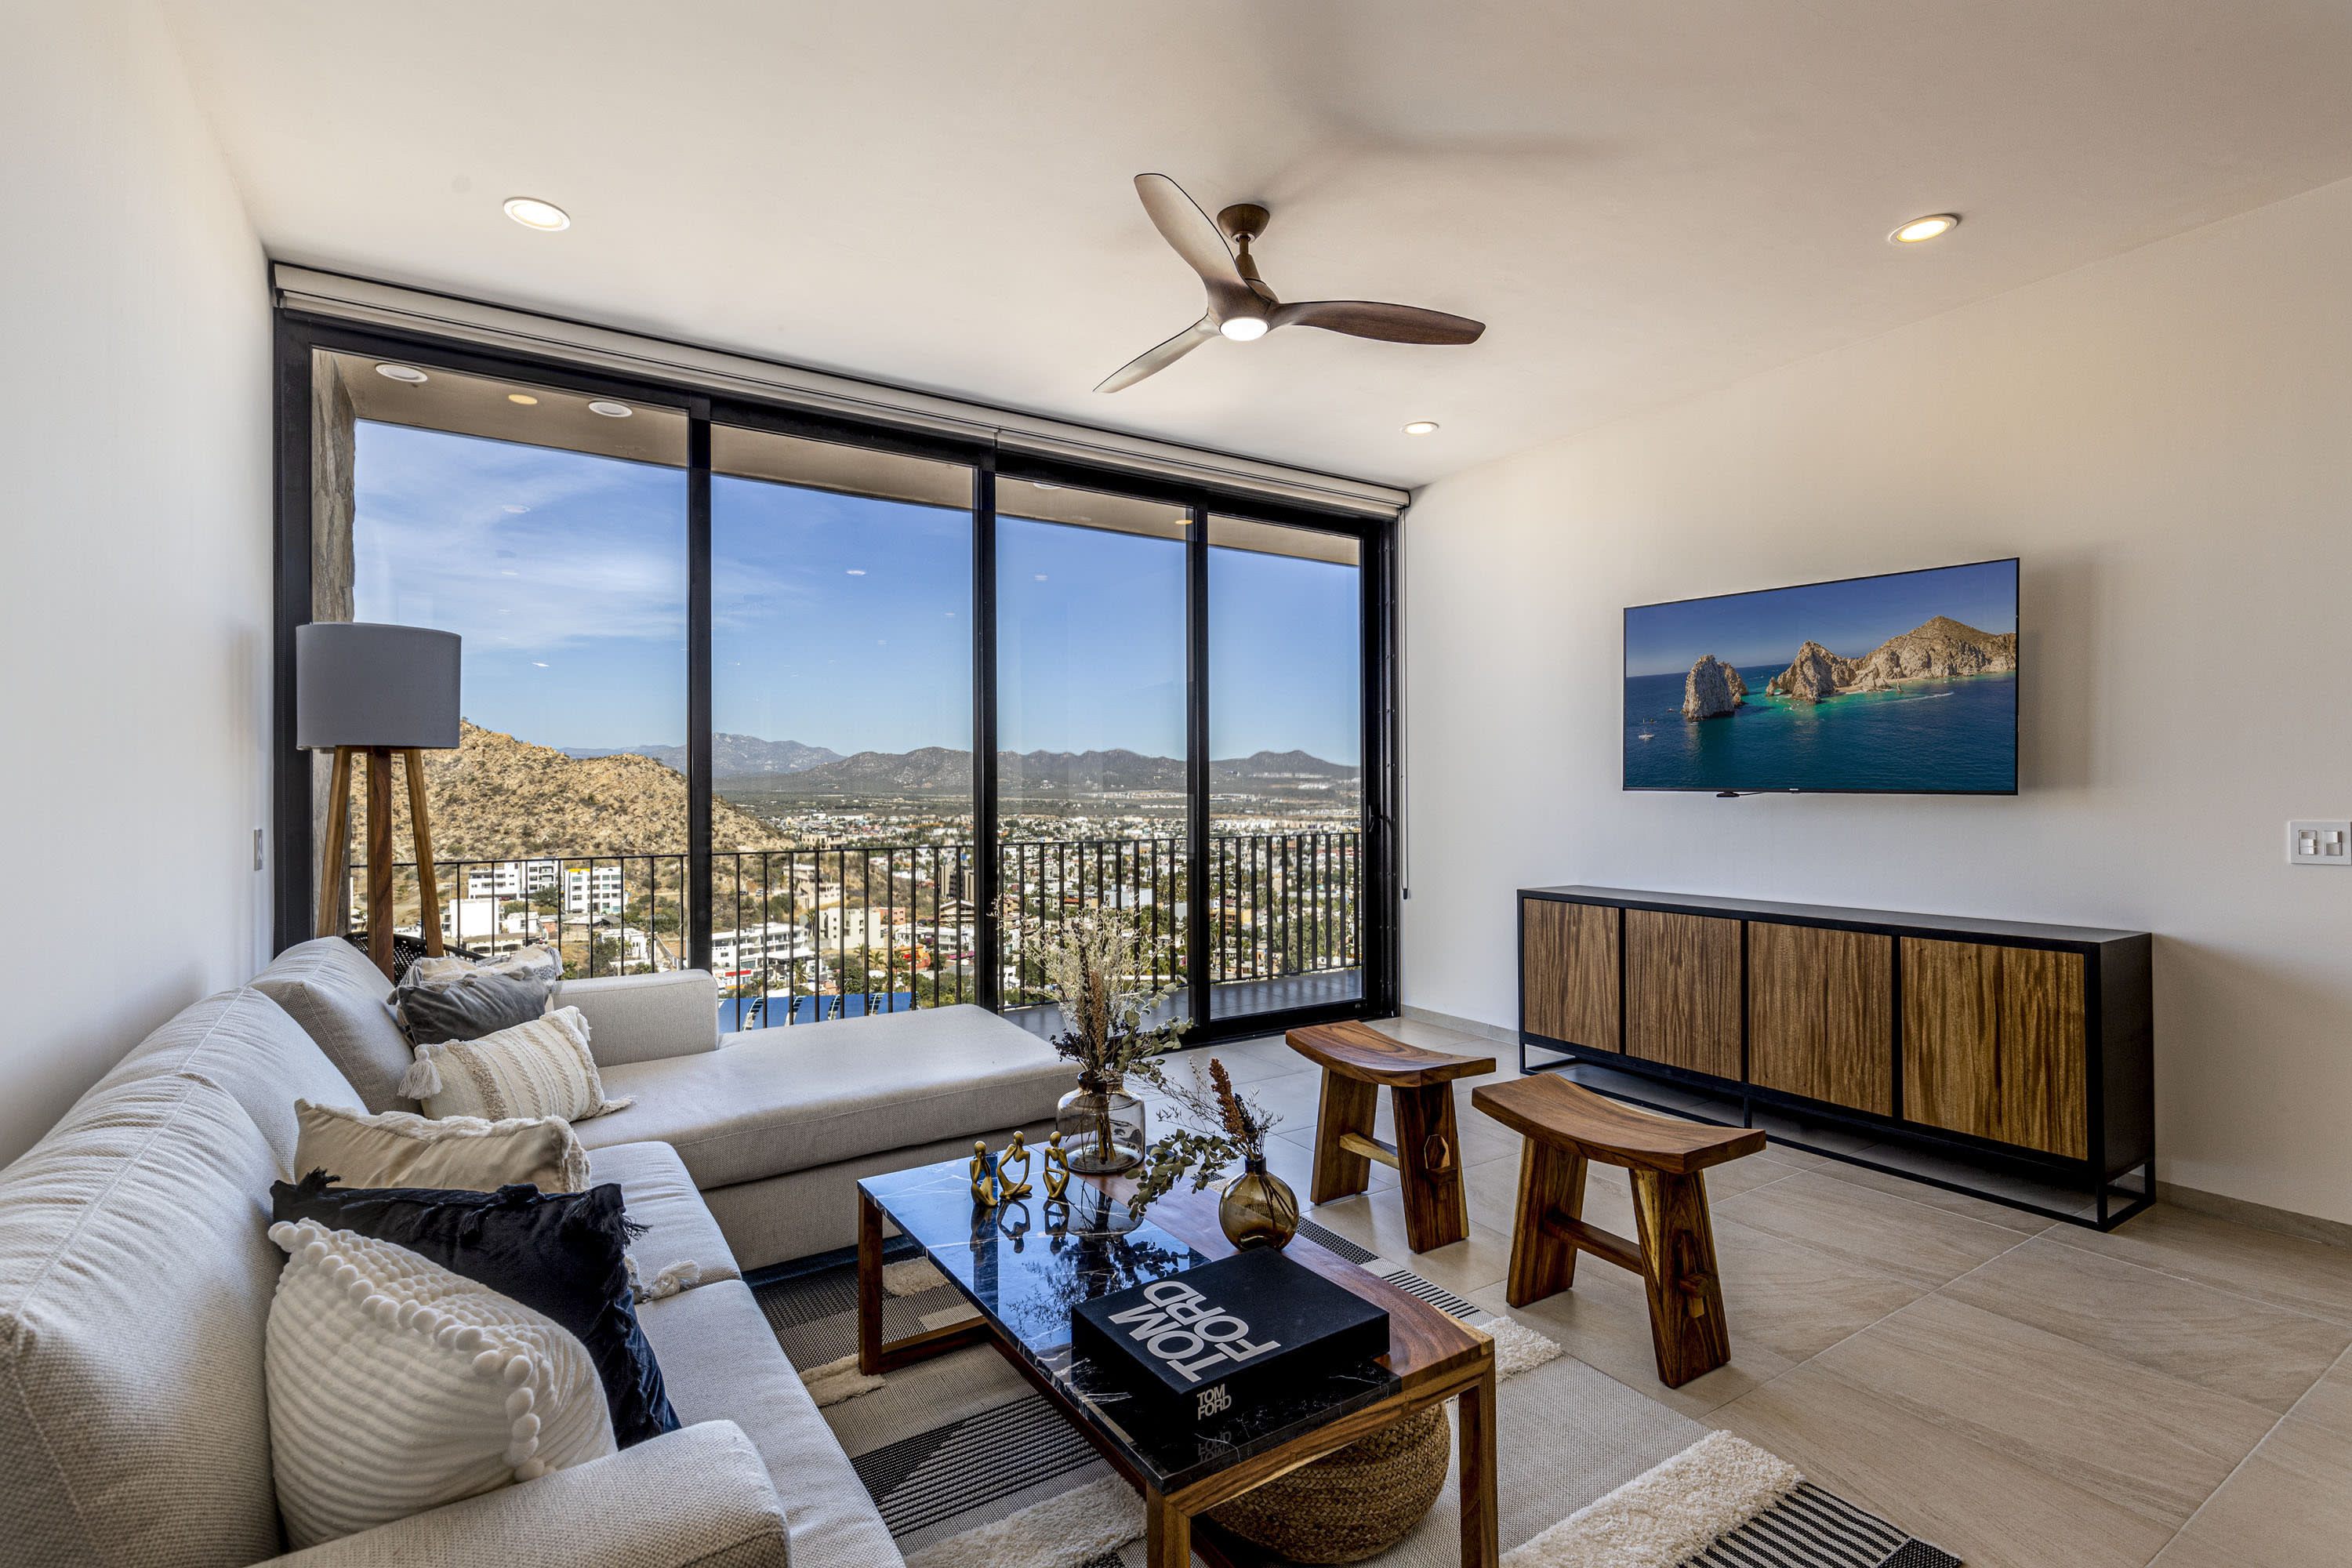 Property Image 1 - Modern & Stylish Condo with Exquisite Mountain View @ Pedregal!